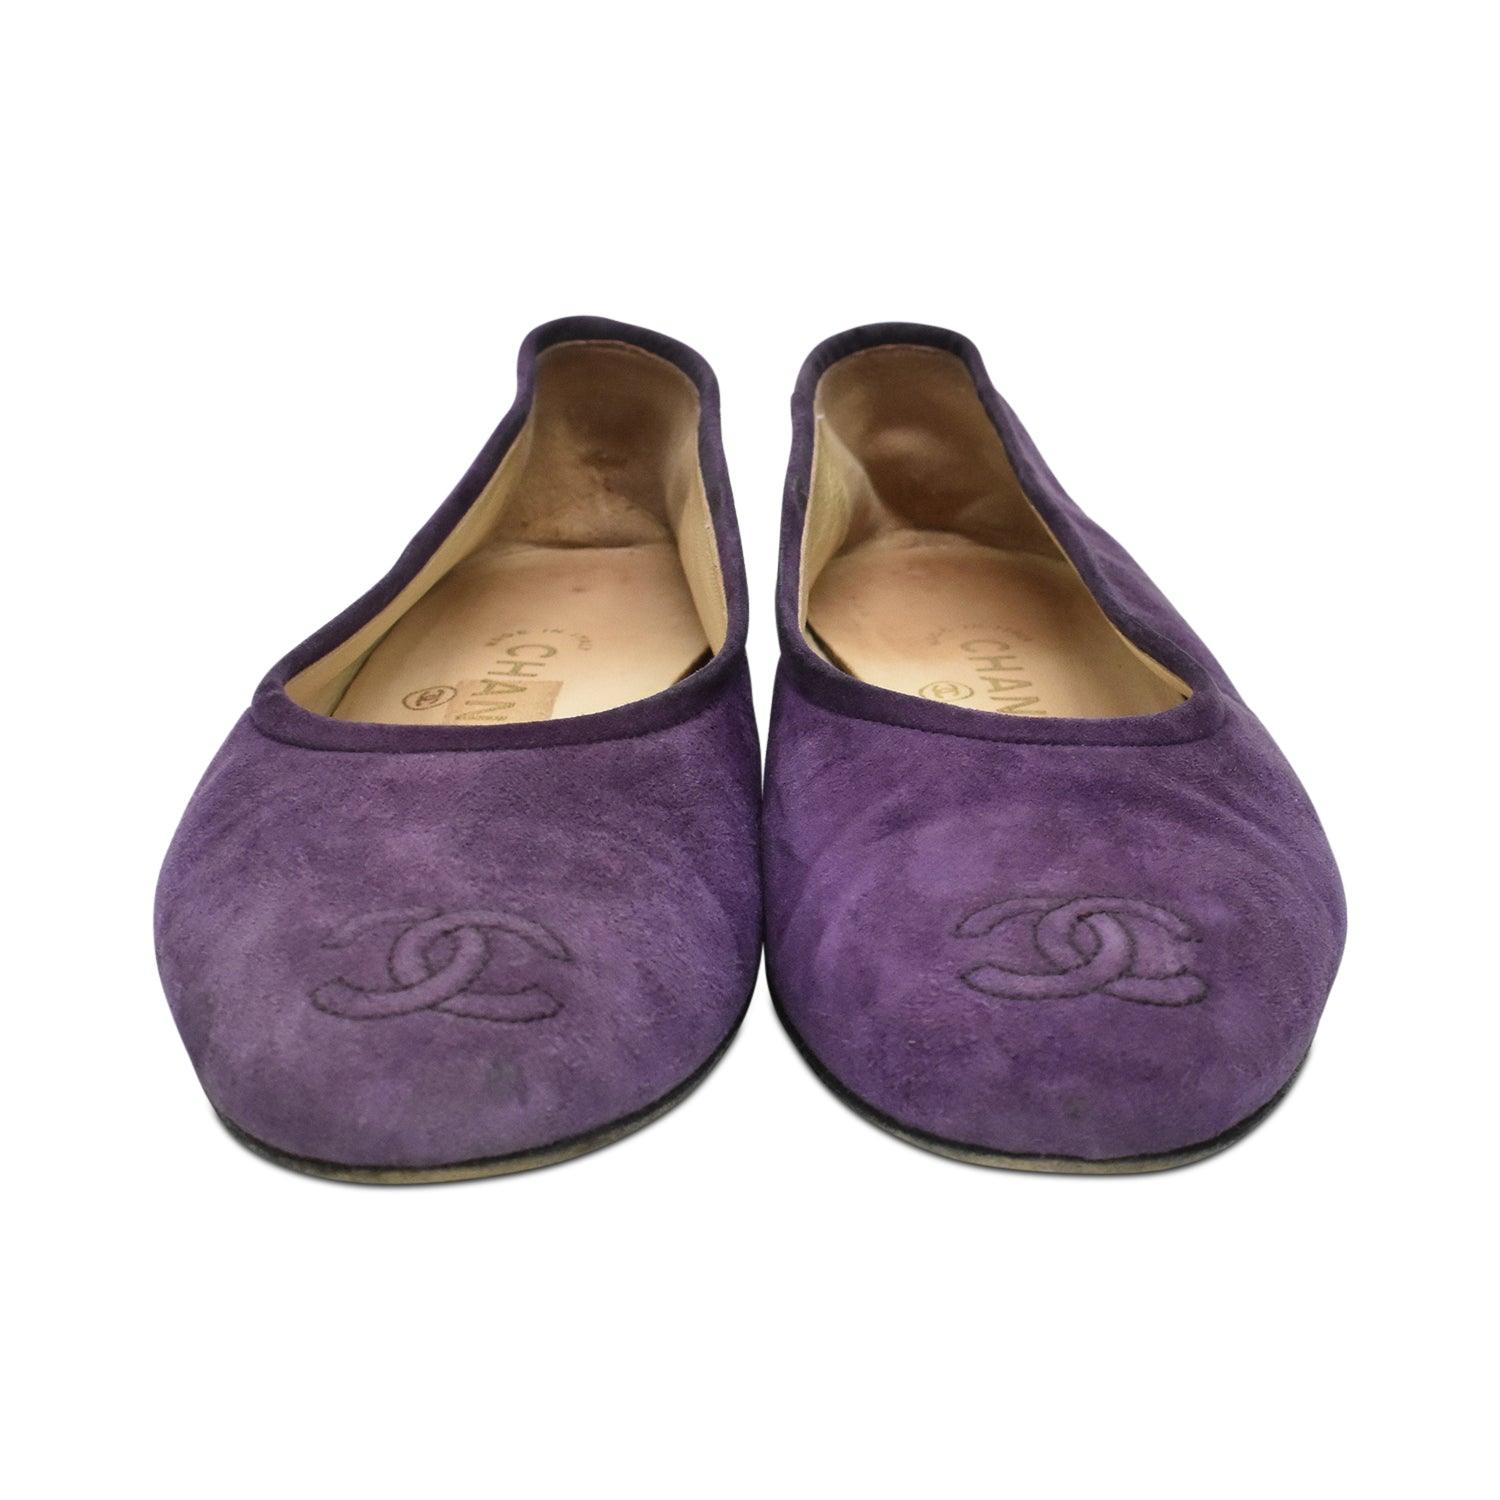 Chanel Flats - Women's 38.5 - Fashionably Yours